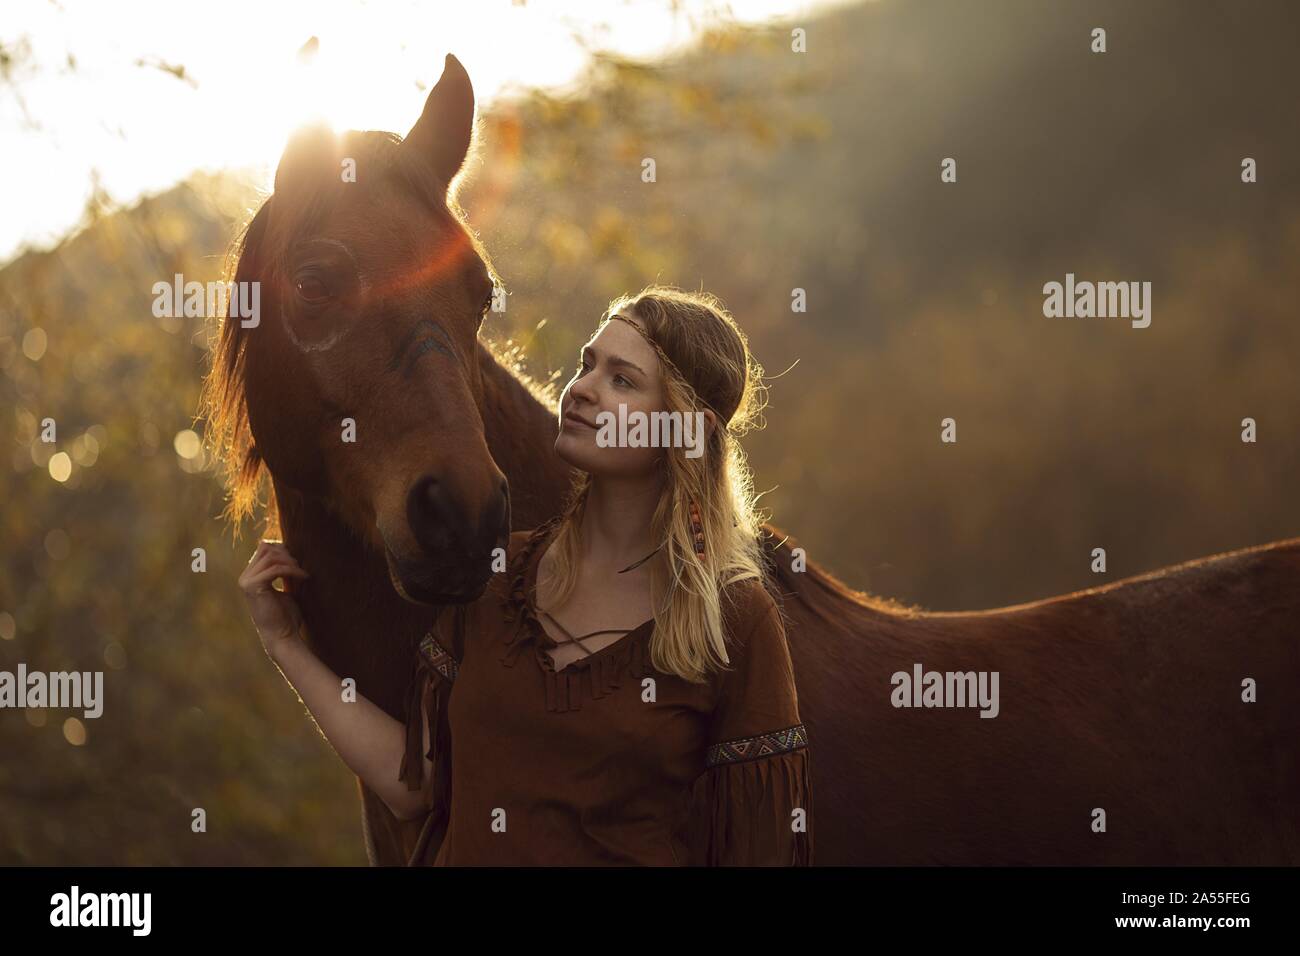 Indian woman with horse Stock Photo